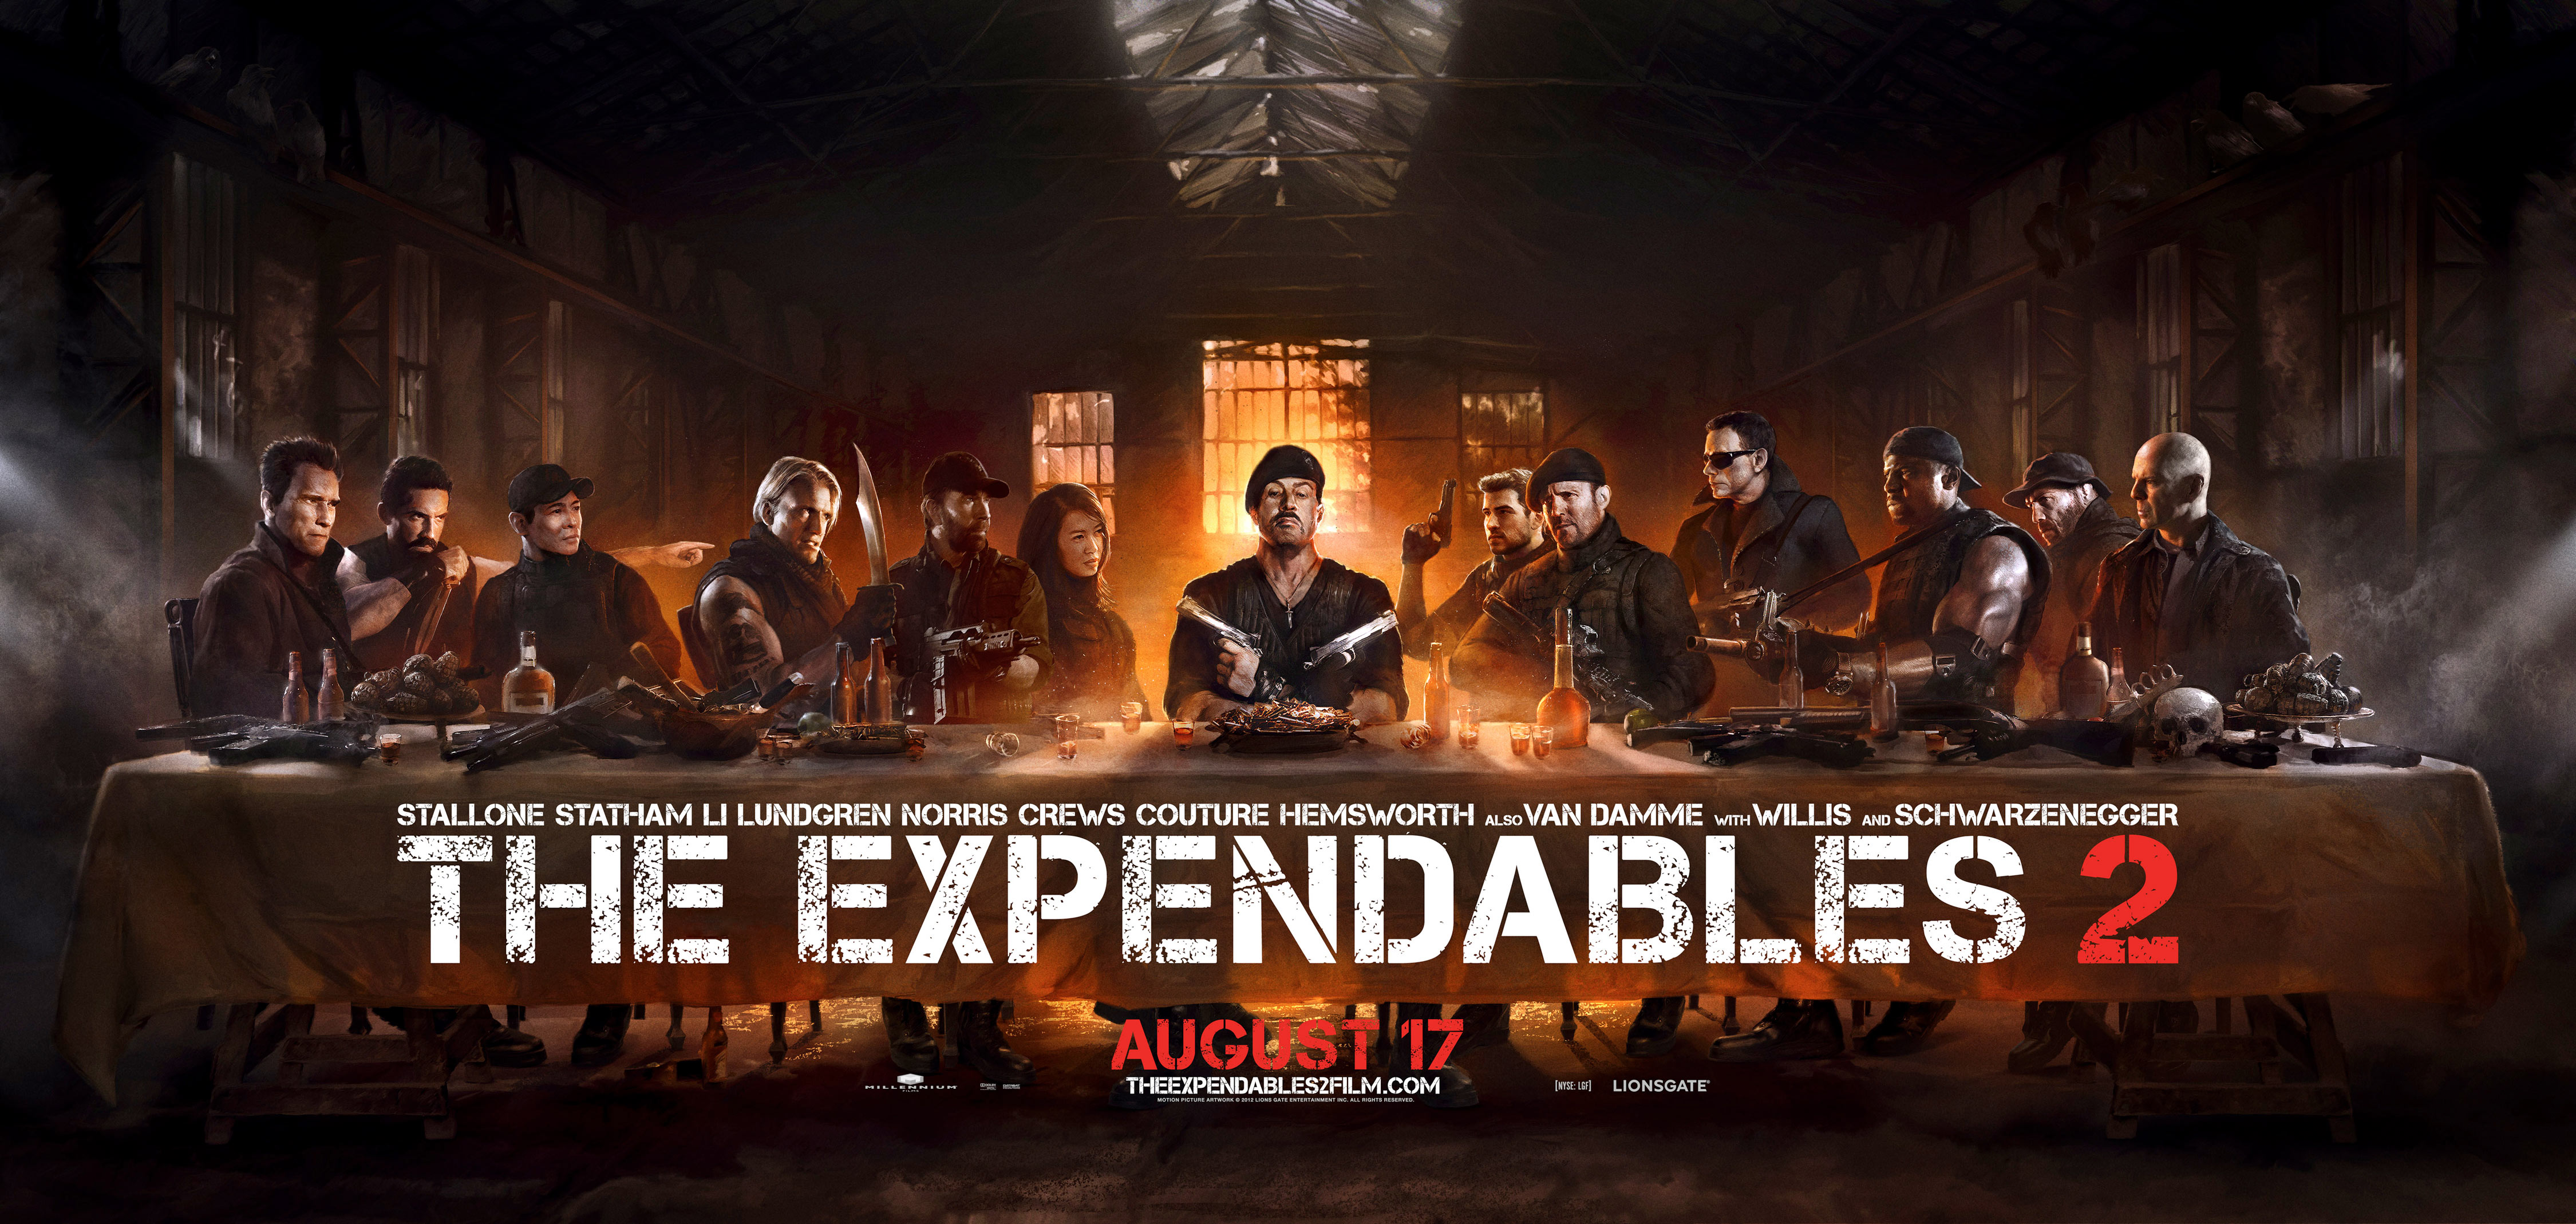 Arnold Schwarzenegger Barney Ross Billy The Expendables Booker The Expendables Bruce Willis Chuck No 4500x2138